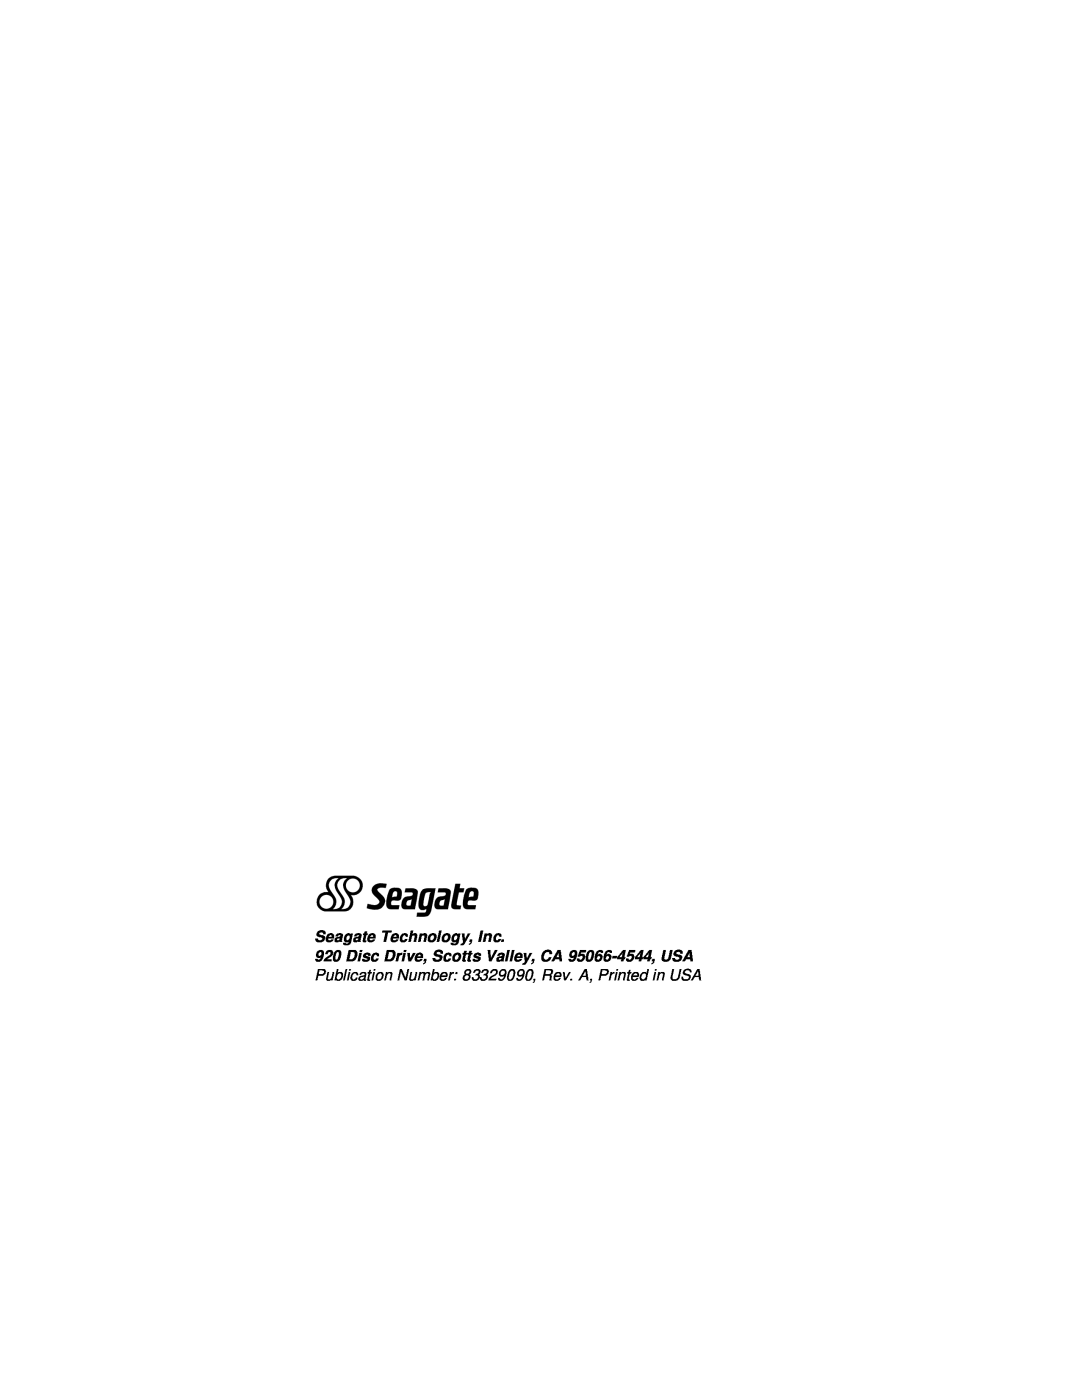 Seagate ST19171FC manual Seagate Technology, Inc, Disc Drive, Scotts Valley, CA 95066-4544, USA 